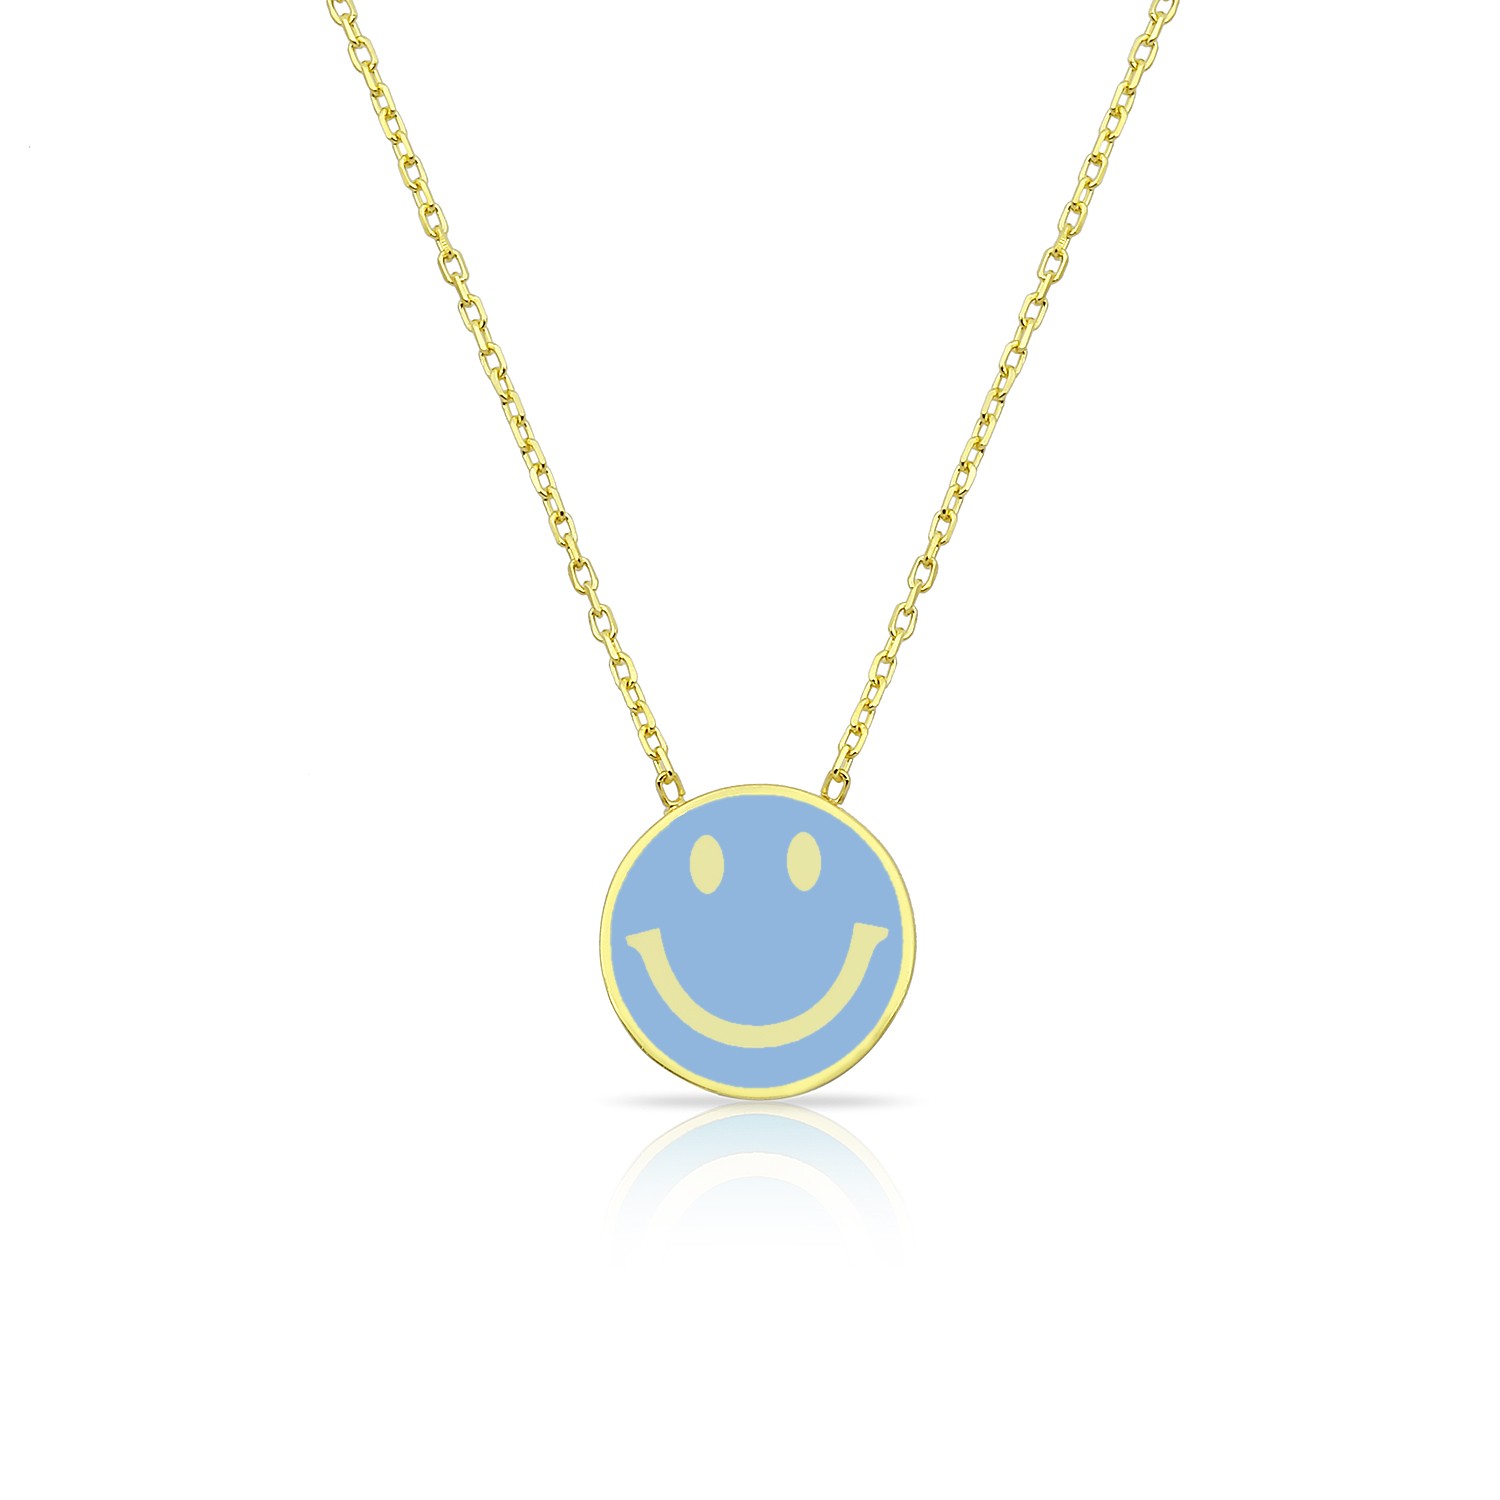 Sterling Silver Yellow Gold Plated Blue Smiley Face Necklace